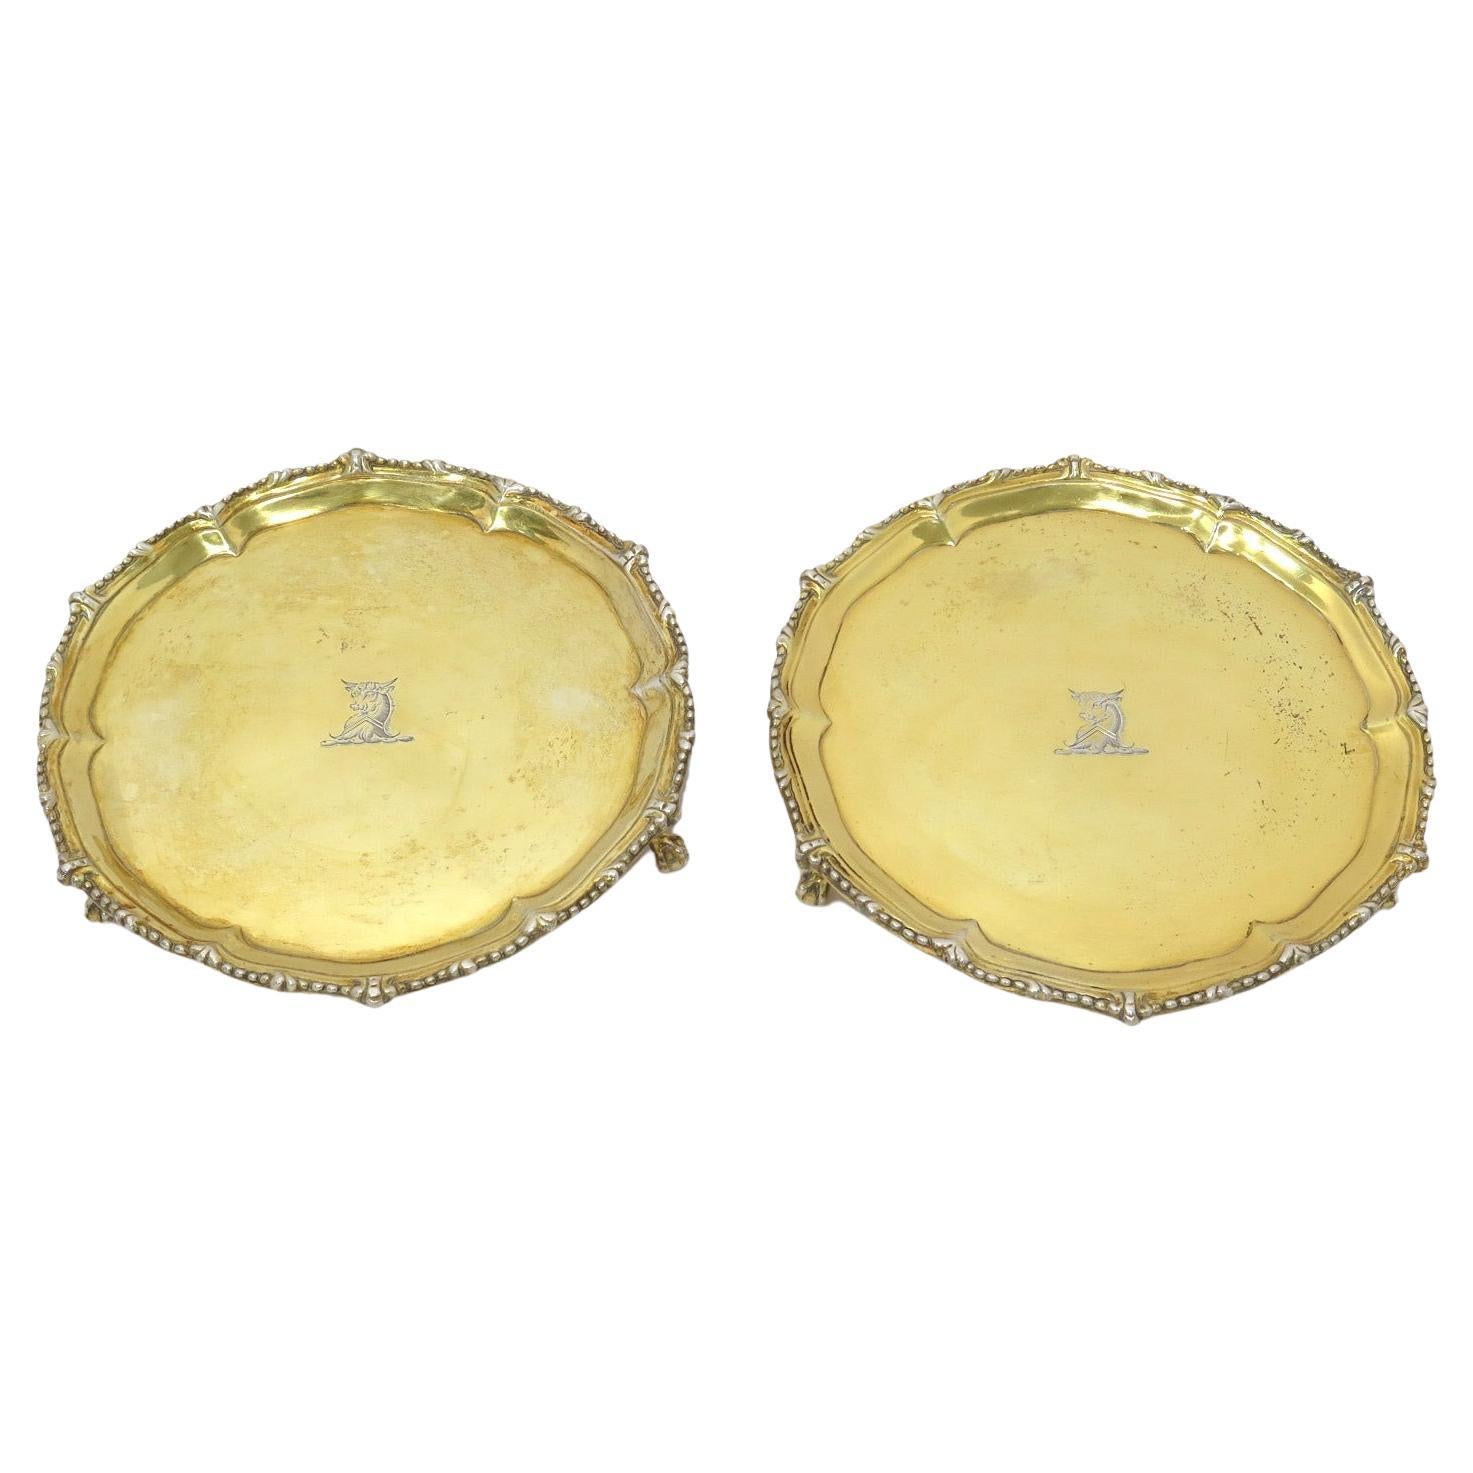 Pair of Sterling Silver Gilt Antique English 1771 Bull Footed Salvers For Sale